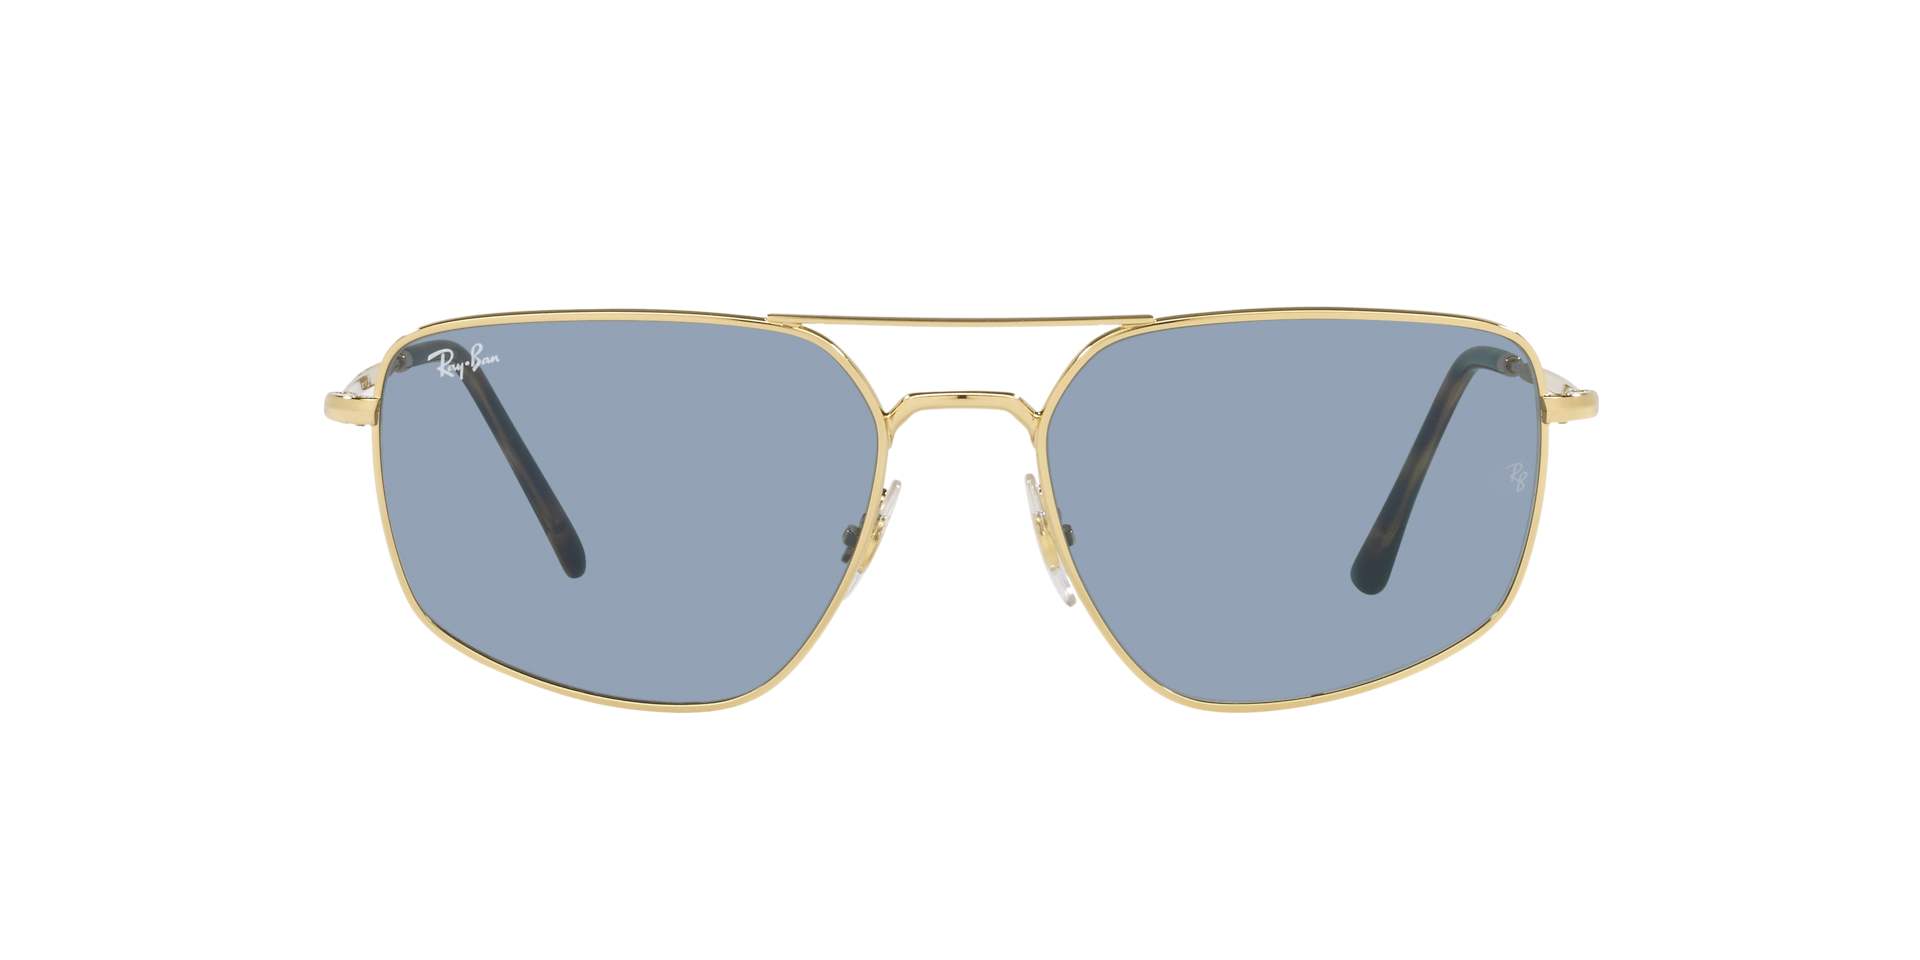 Buy Ray-Ban Rb3666 Sunglasses Online.